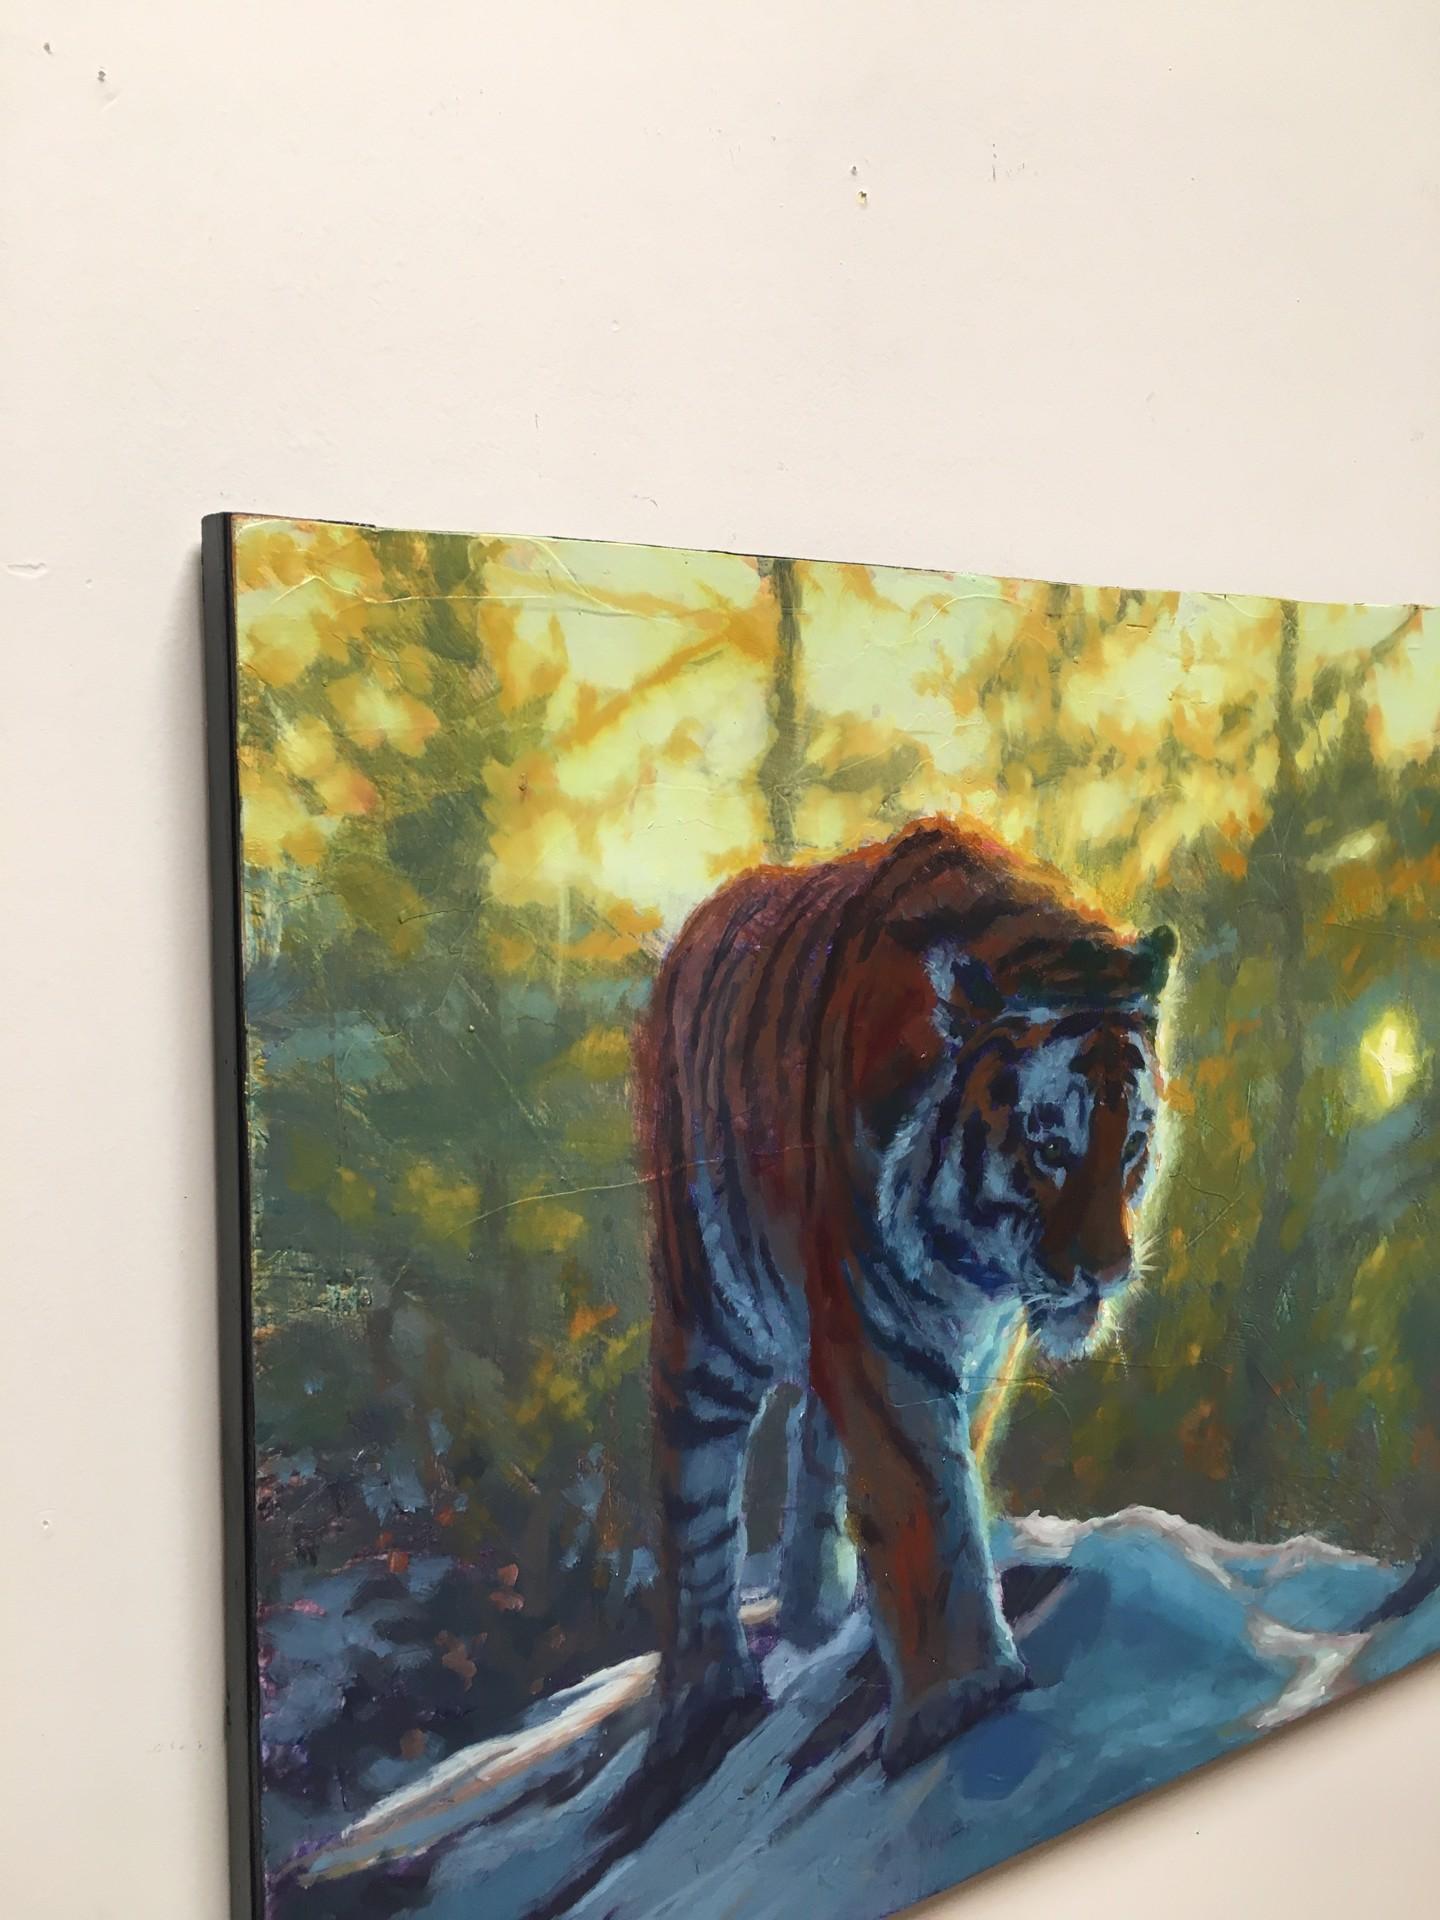 Exploring the Wild - Painting by Christopher Clark